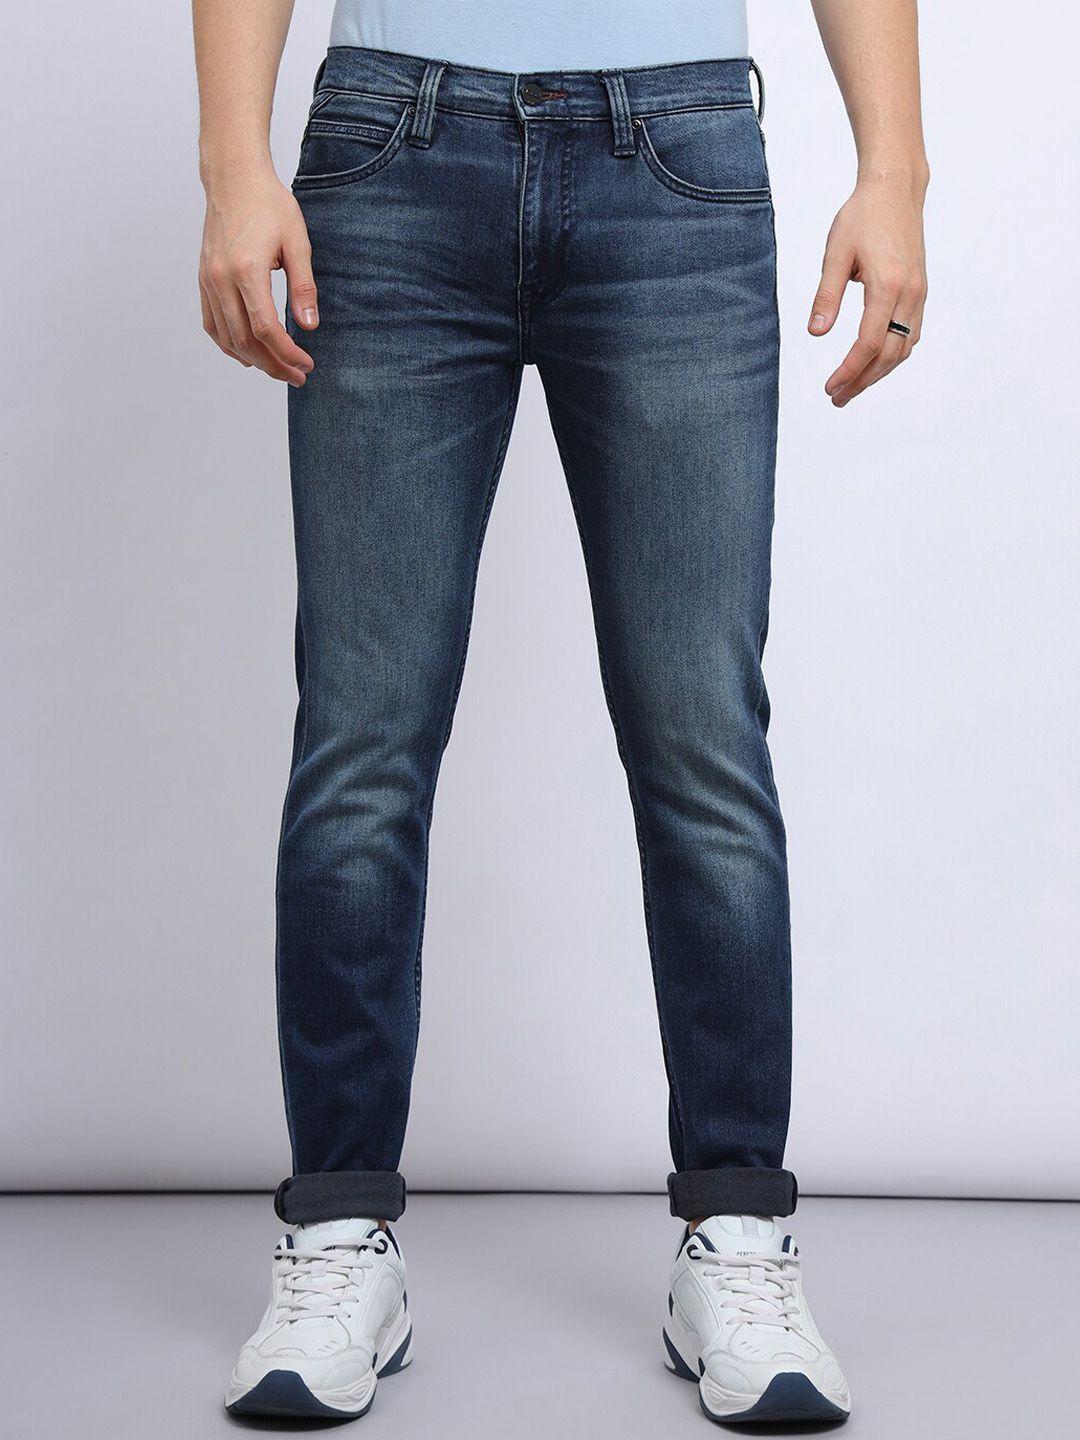 lee-men-skinny-fit-low-rise-cotton-stretchable-jeans